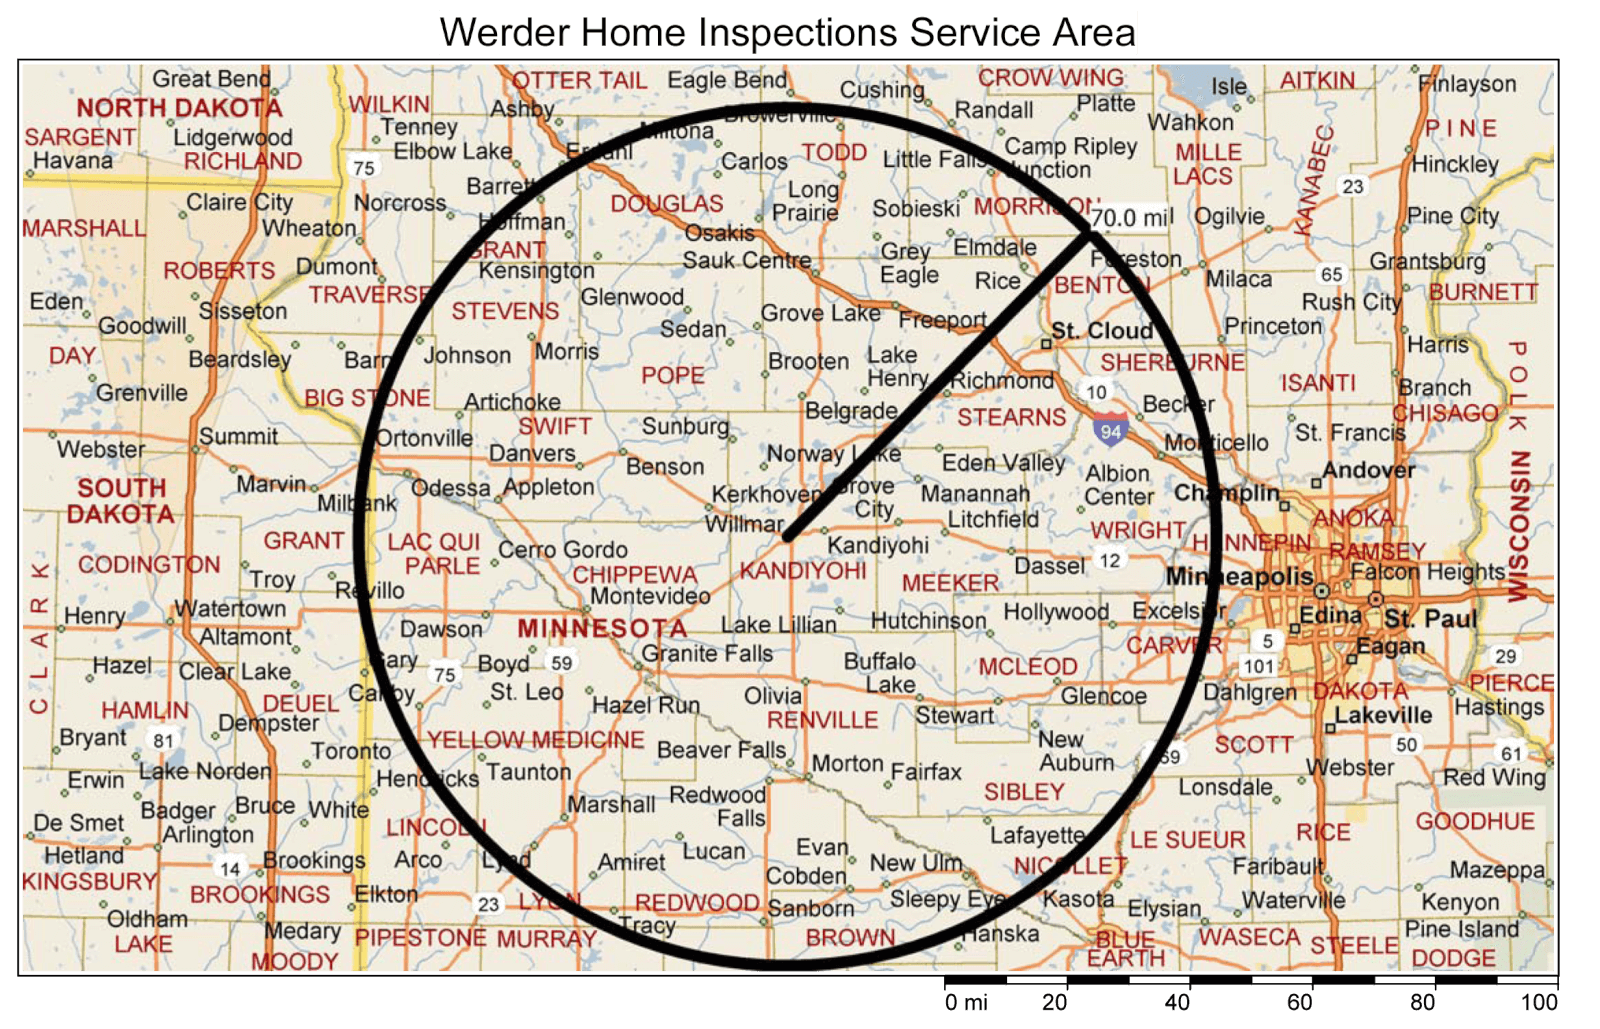 Werder Home Inspection Service Area